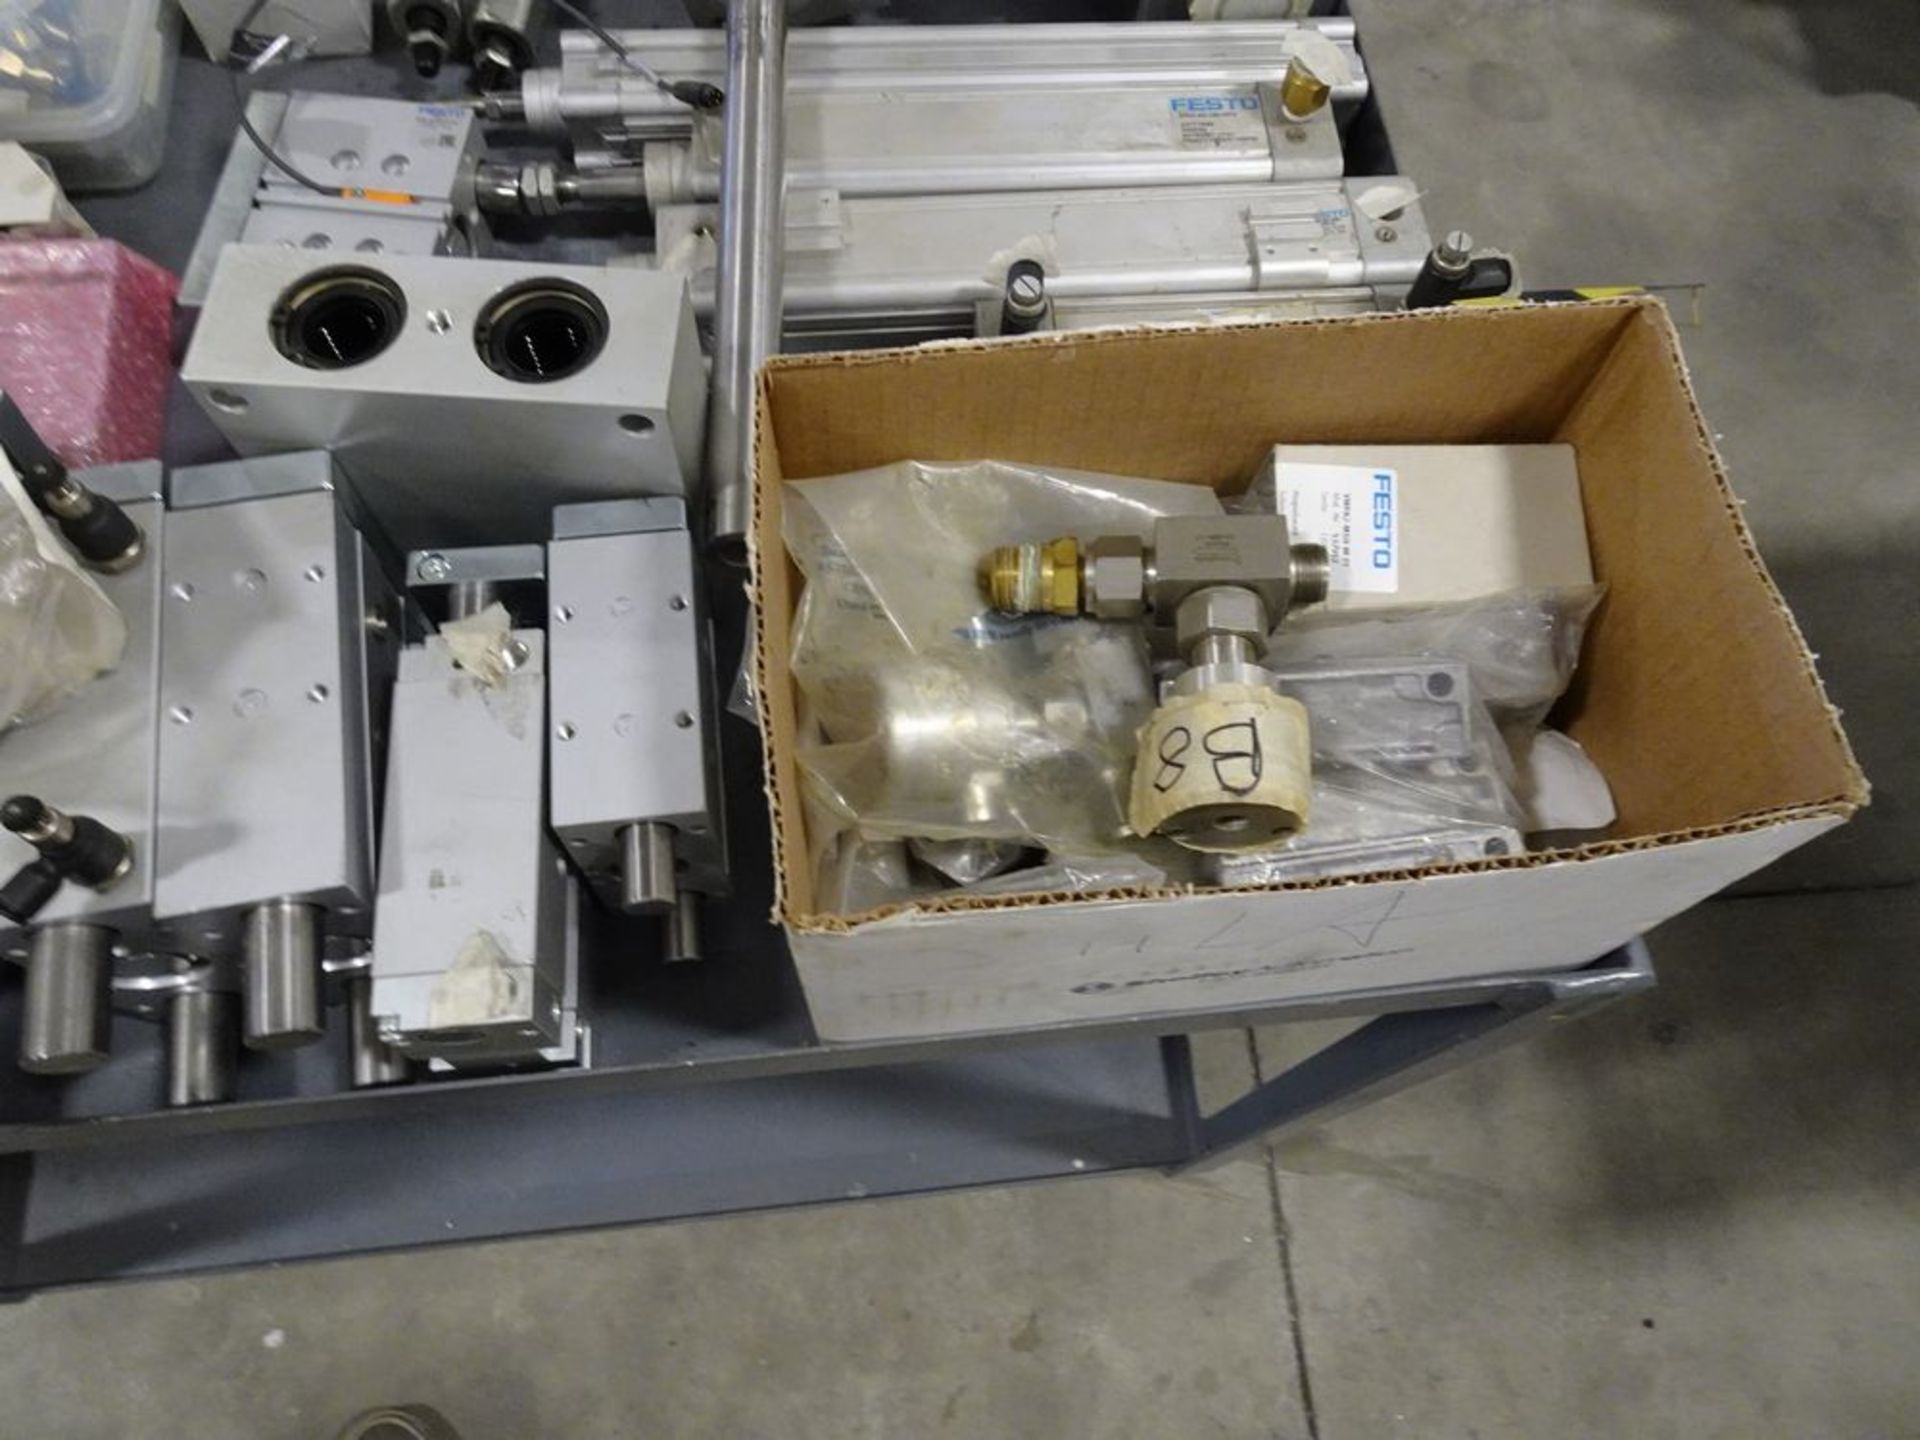 ASSORTED PRODUCT, CYLINDERS, FESTO VALVES, FITTINGS, ETC. - Image 5 of 5